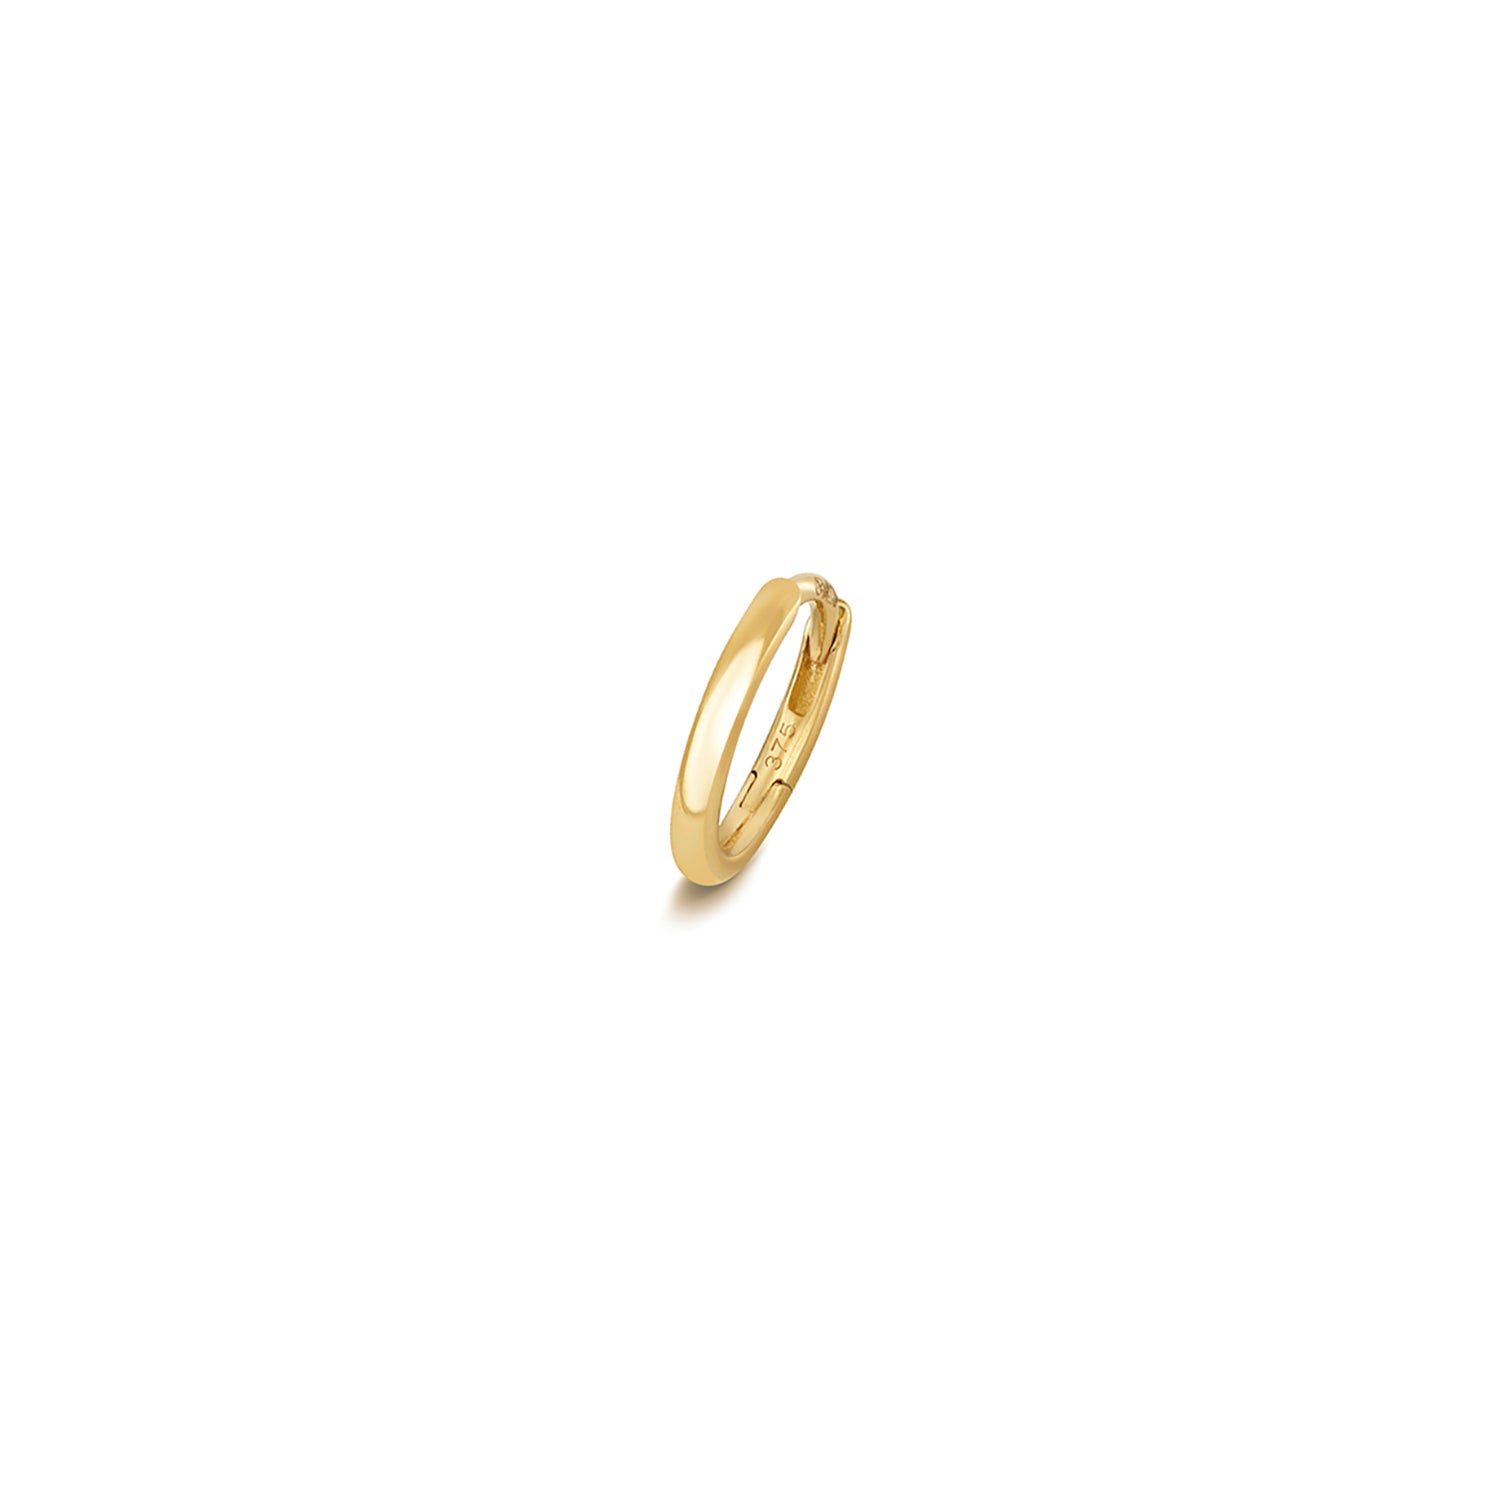 9CT GOLD CARTILAGE EARRING SOLID RND TUBE